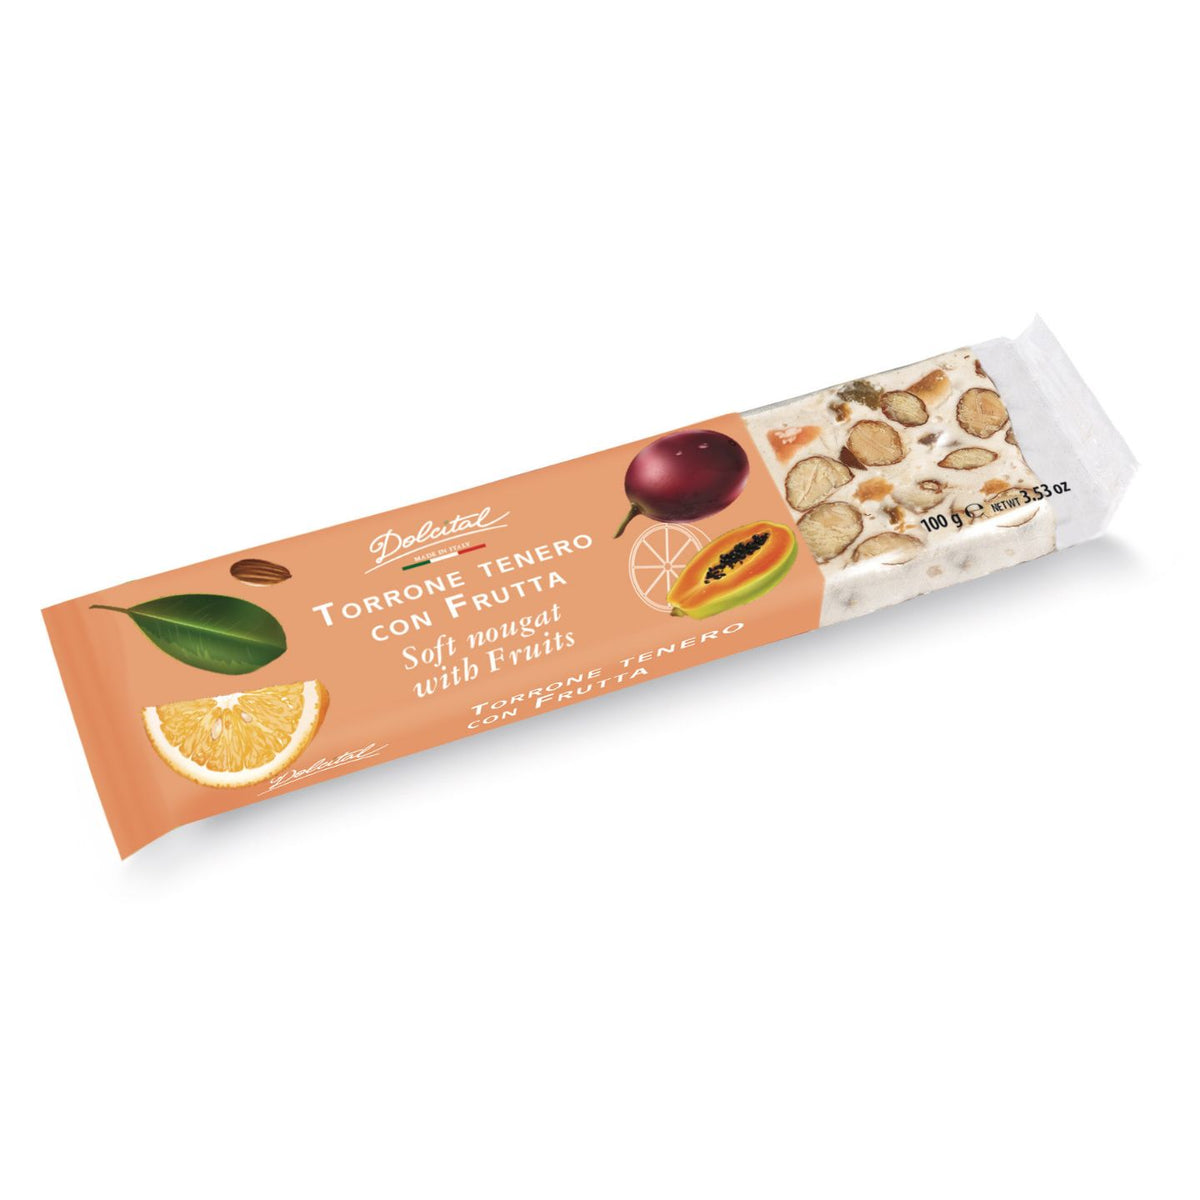 Dolcital Soft Nougat with Almonds &amp; Fruit 100g  | Imported and distributed in the UK by Just Gourmet Foods